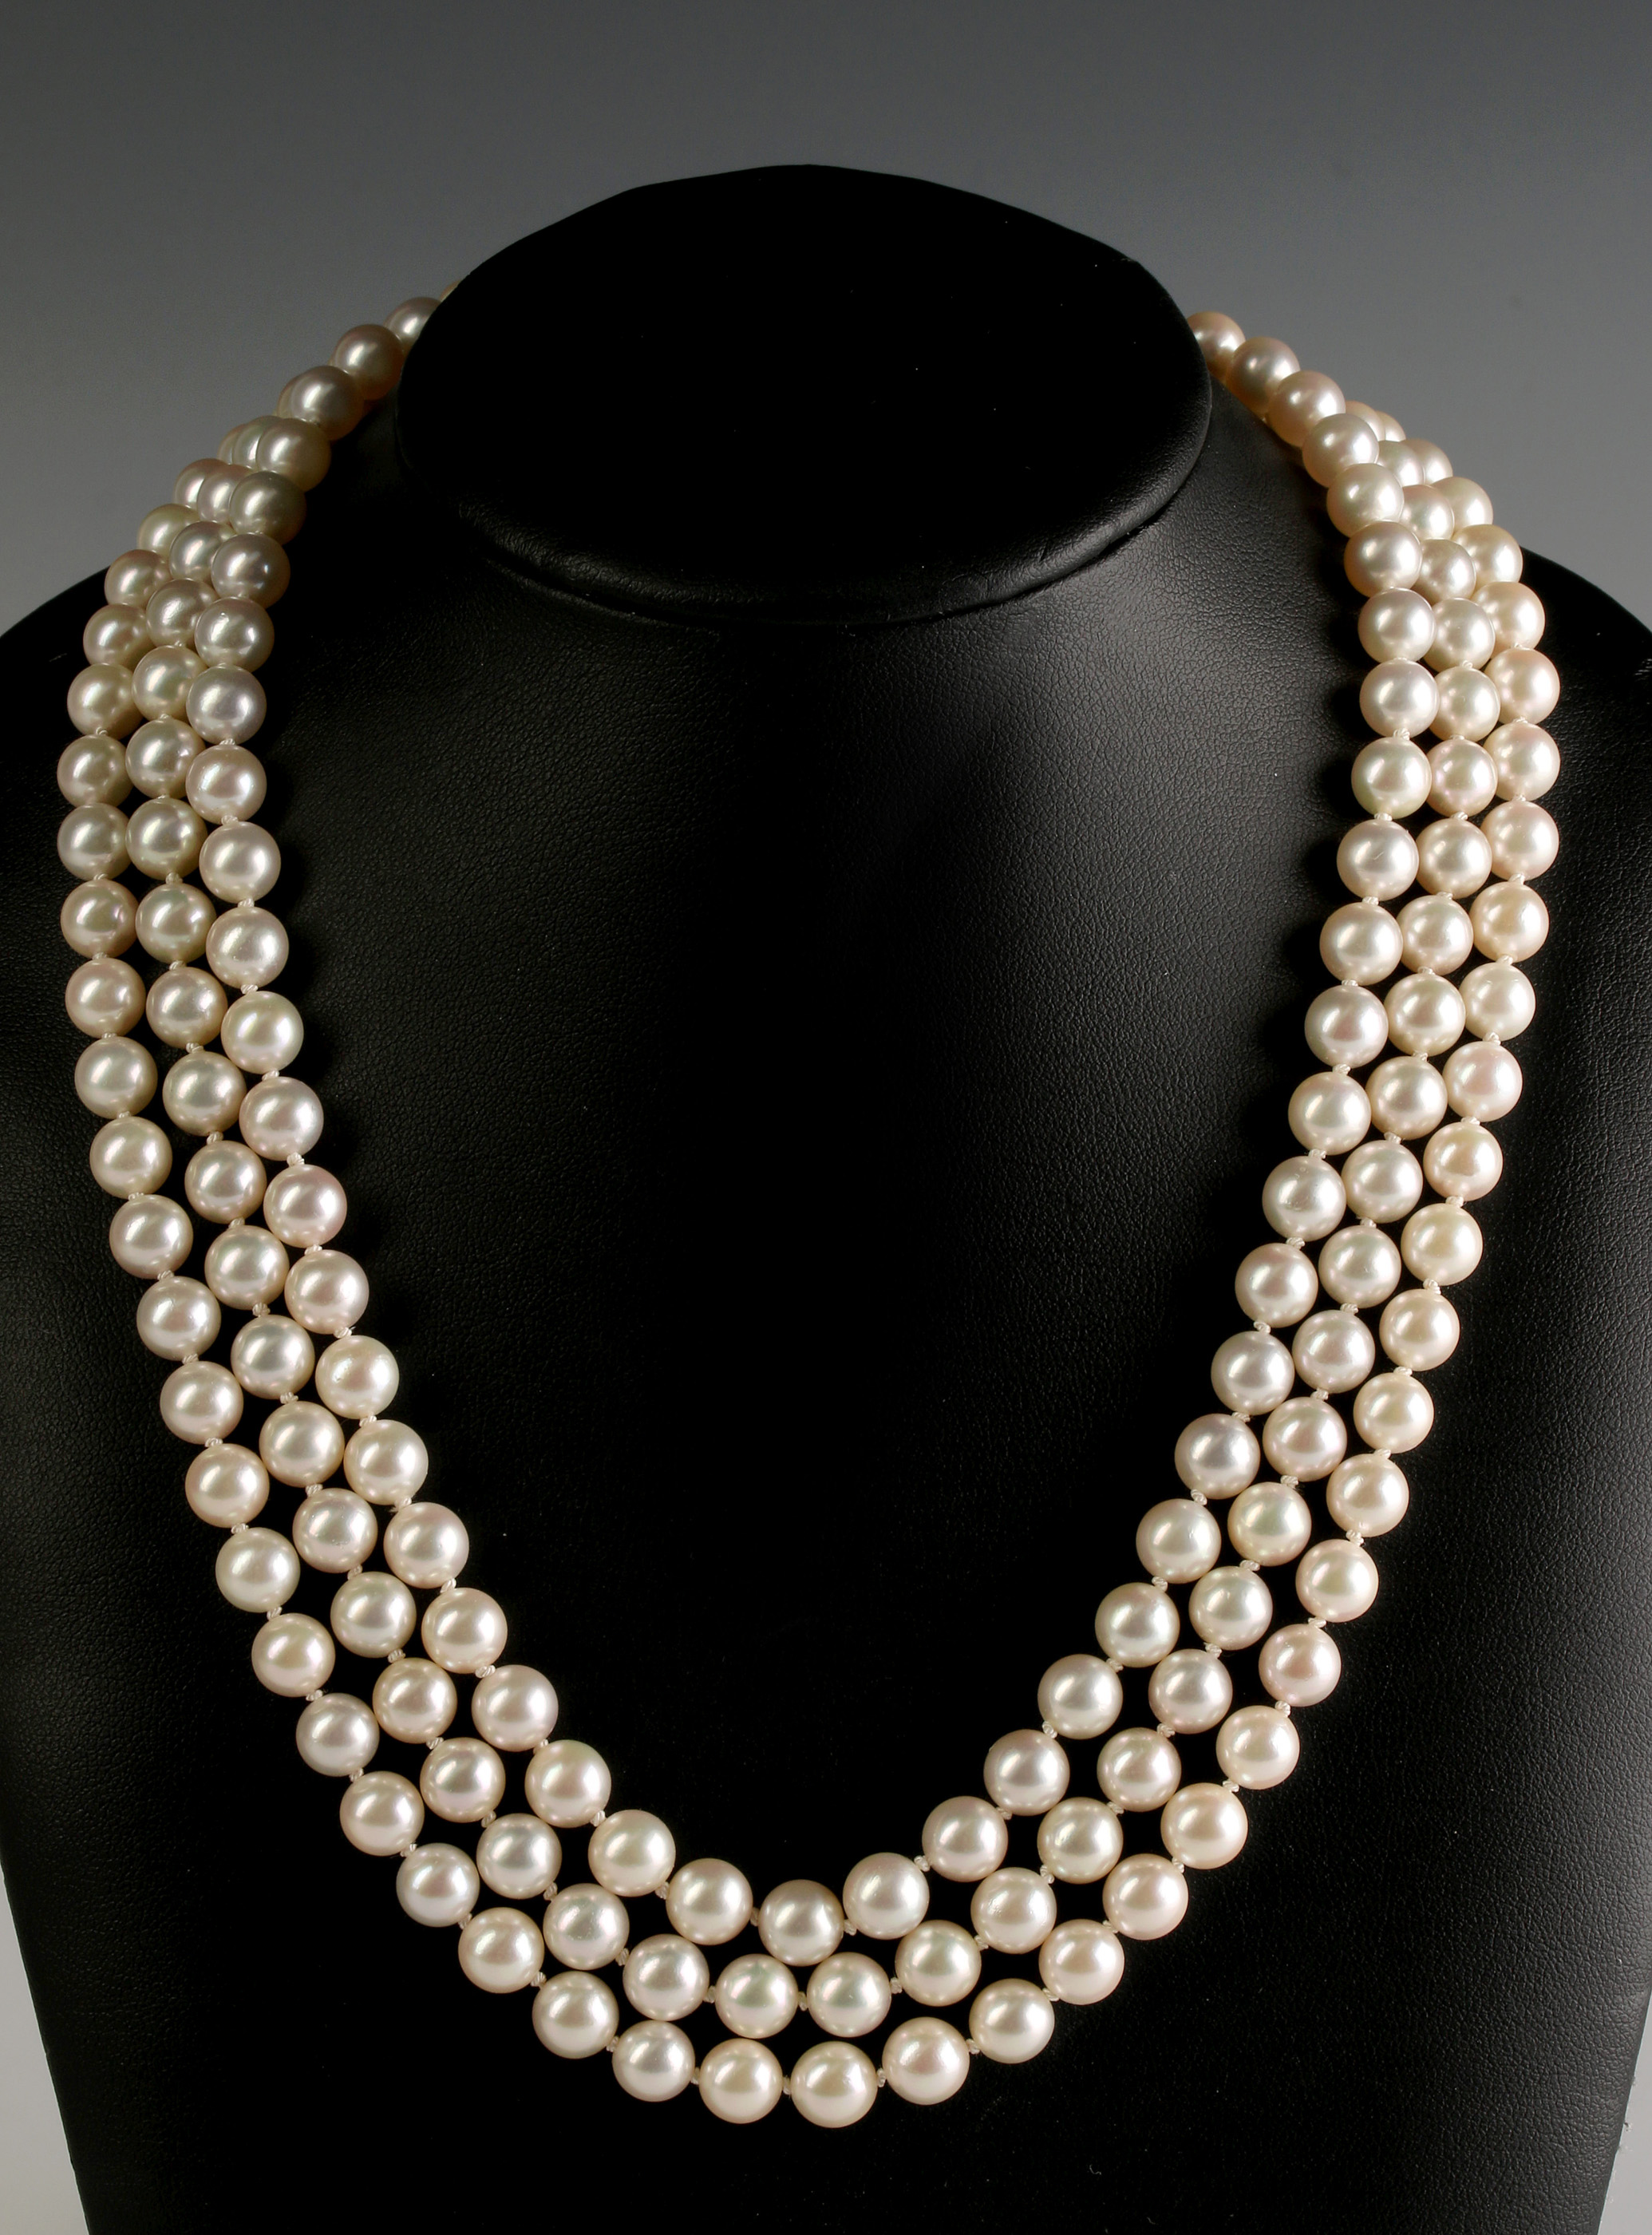 A FOUR STRAND PEARL NECKLACE WITH DIAMOND CLASP